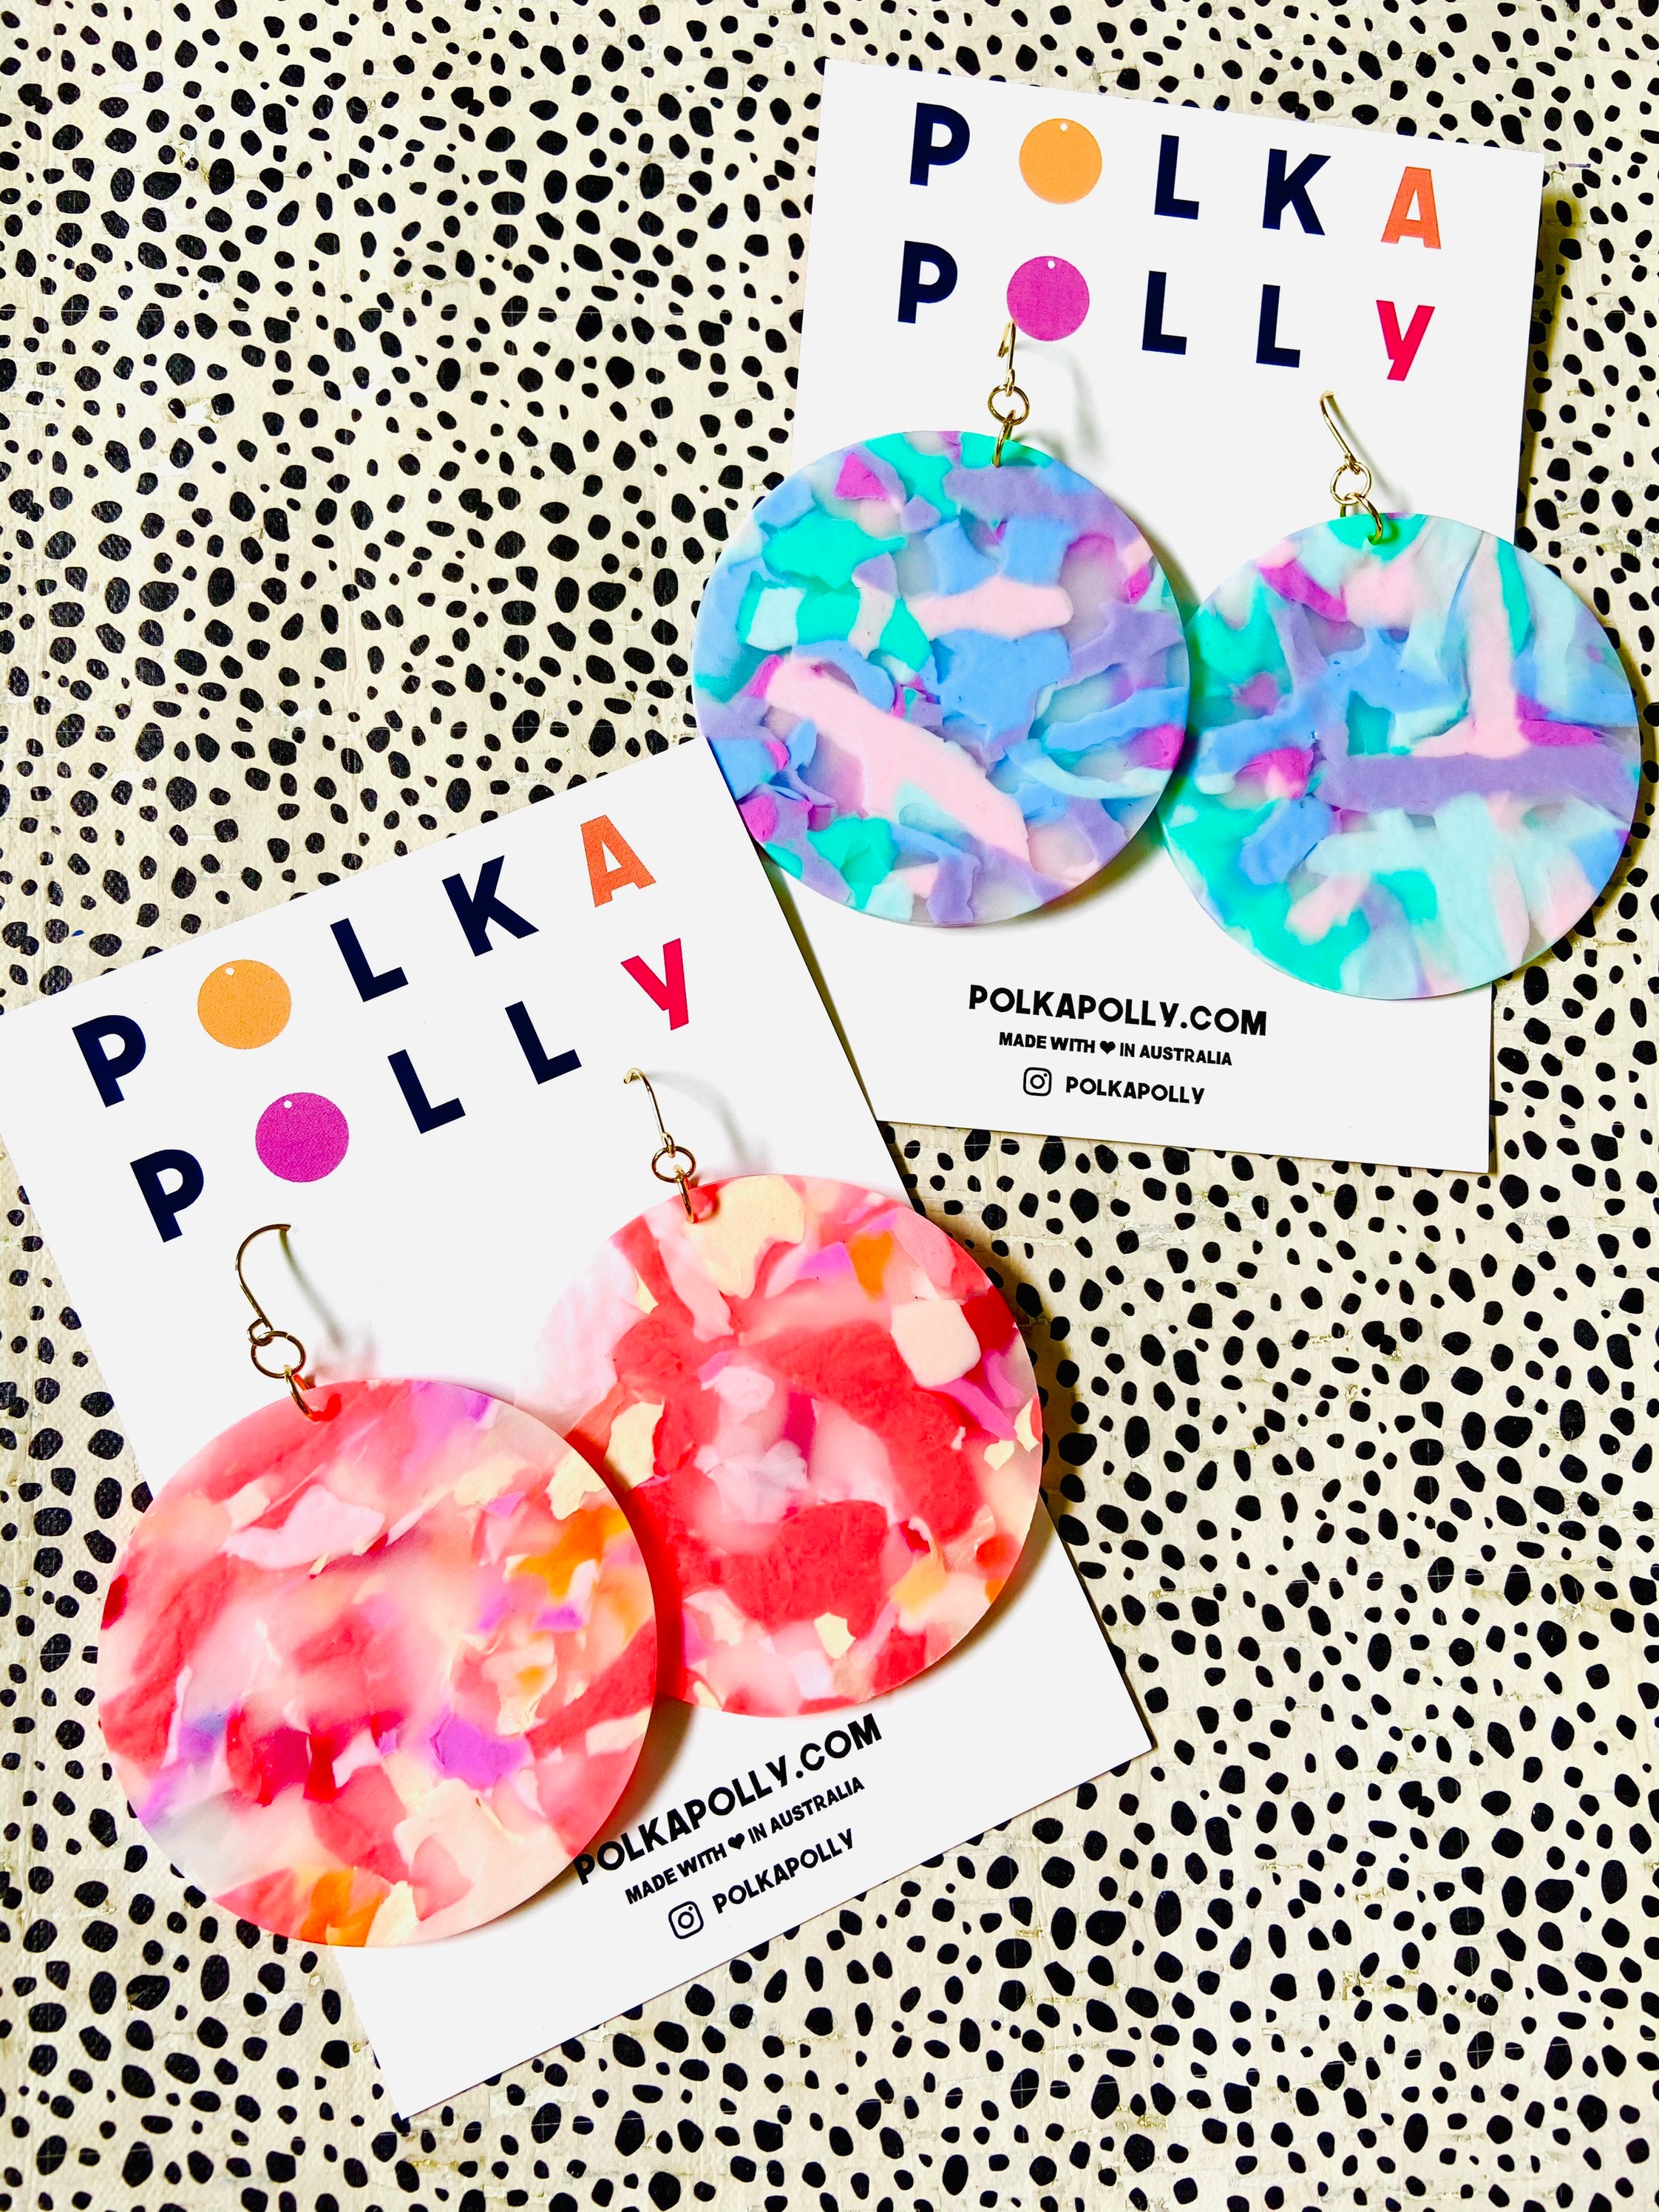 Polka Polly XL super earrings. Big Abstract patterned dangle | Etsy